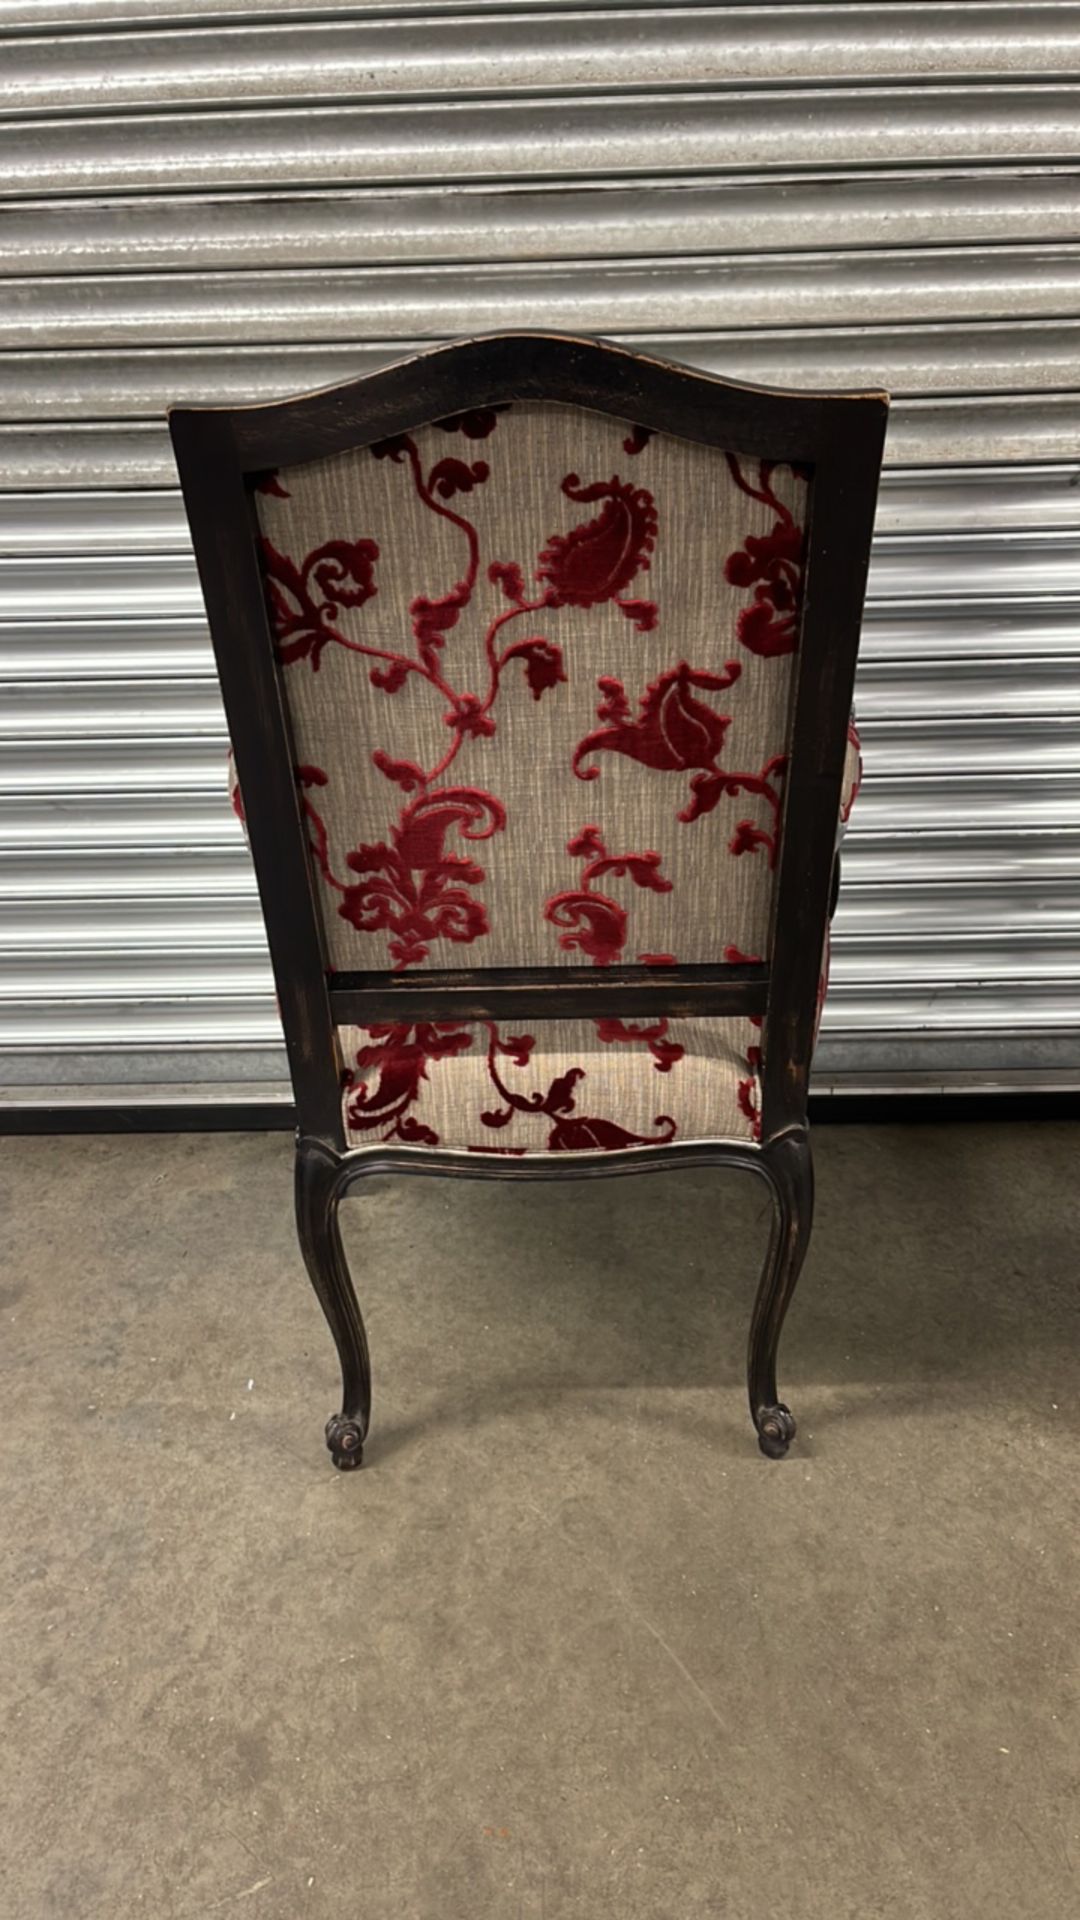 Pair of Roche Bobois Floral Dining Chairs with Arms RRP £650 Per Chair - Image 7 of 8